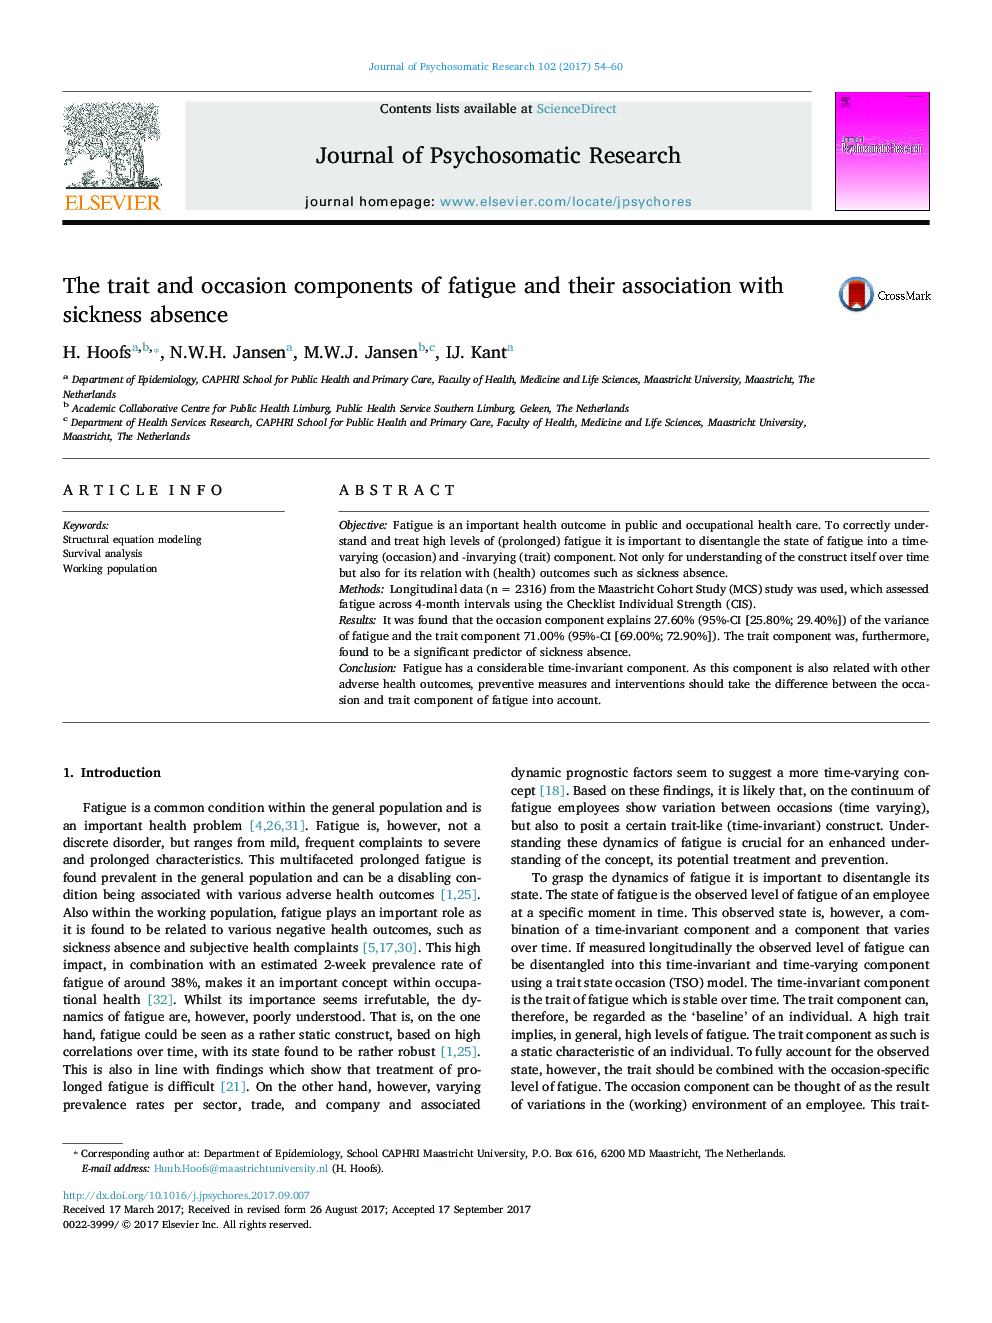 The trait and occasion components of fatigue and their association with sickness absence